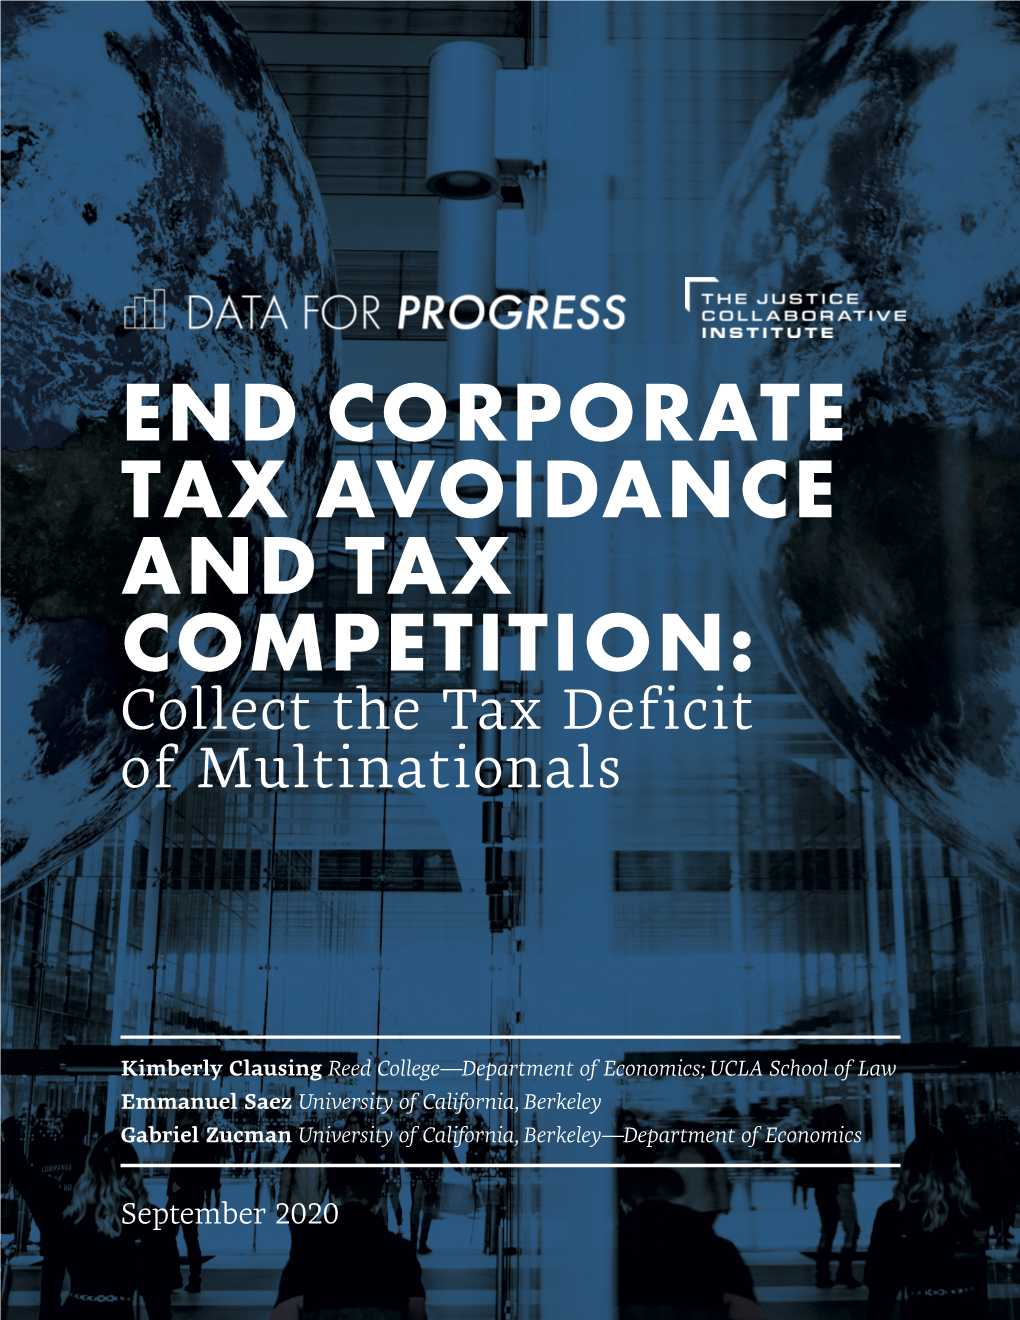 END CORPORATE TAX AVOIDANCE and TAX COMPETITION: Collect the Tax Deficit of Multinationals